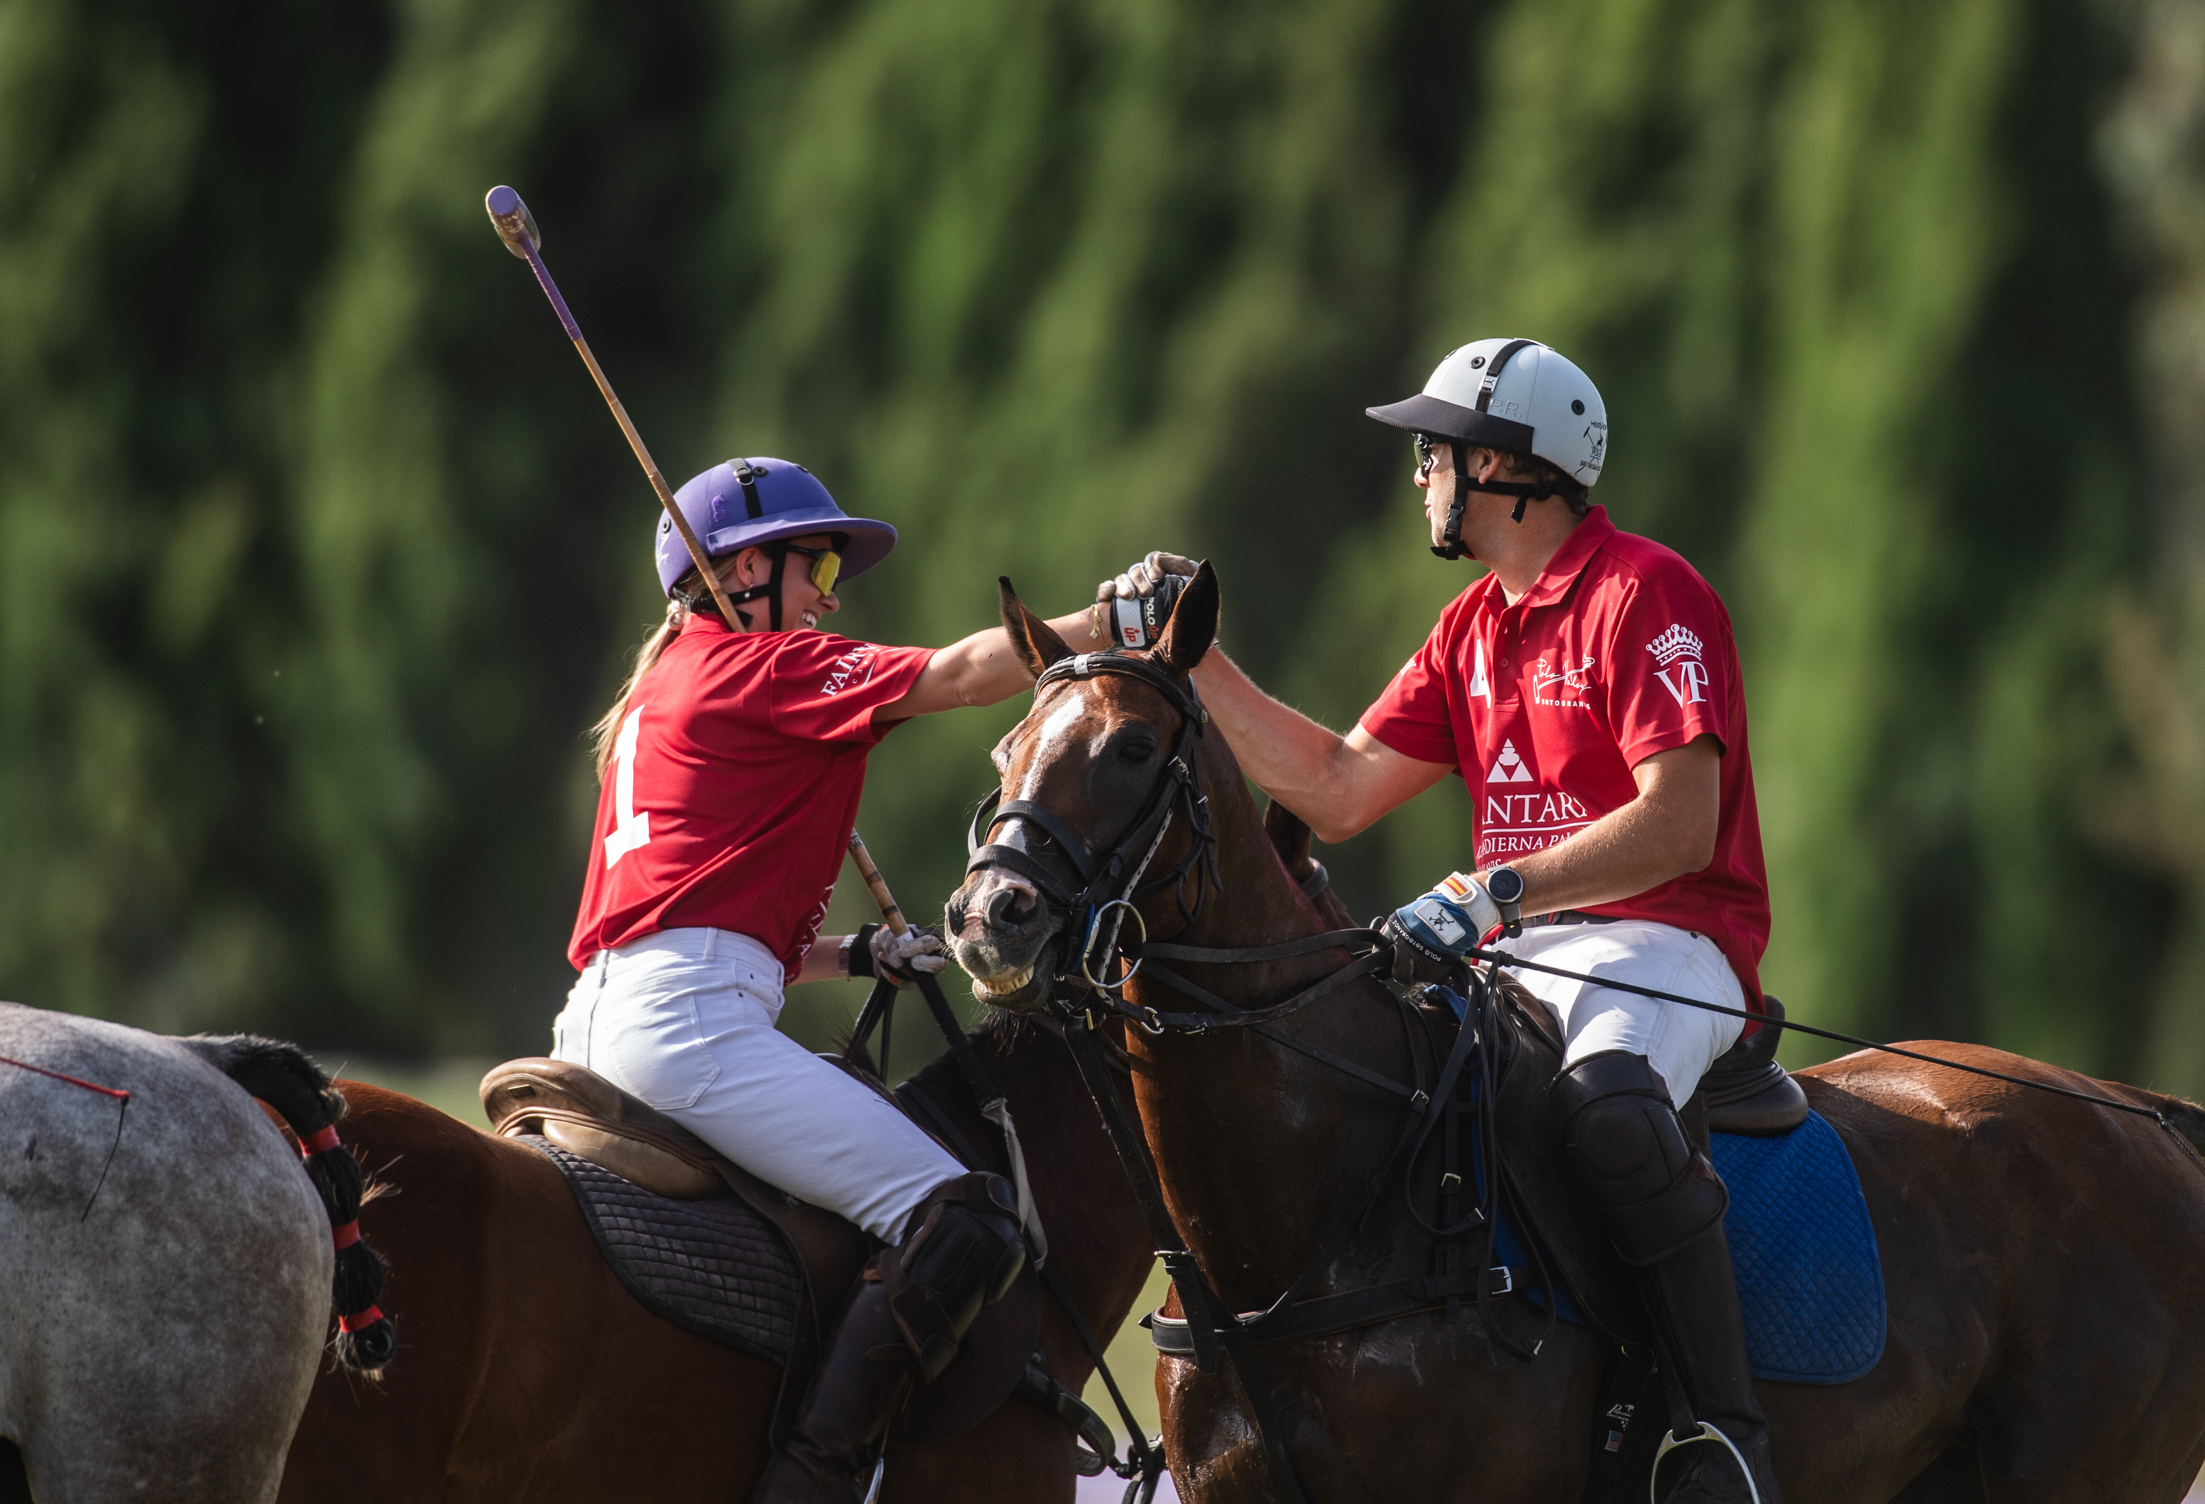 Learn to play polo